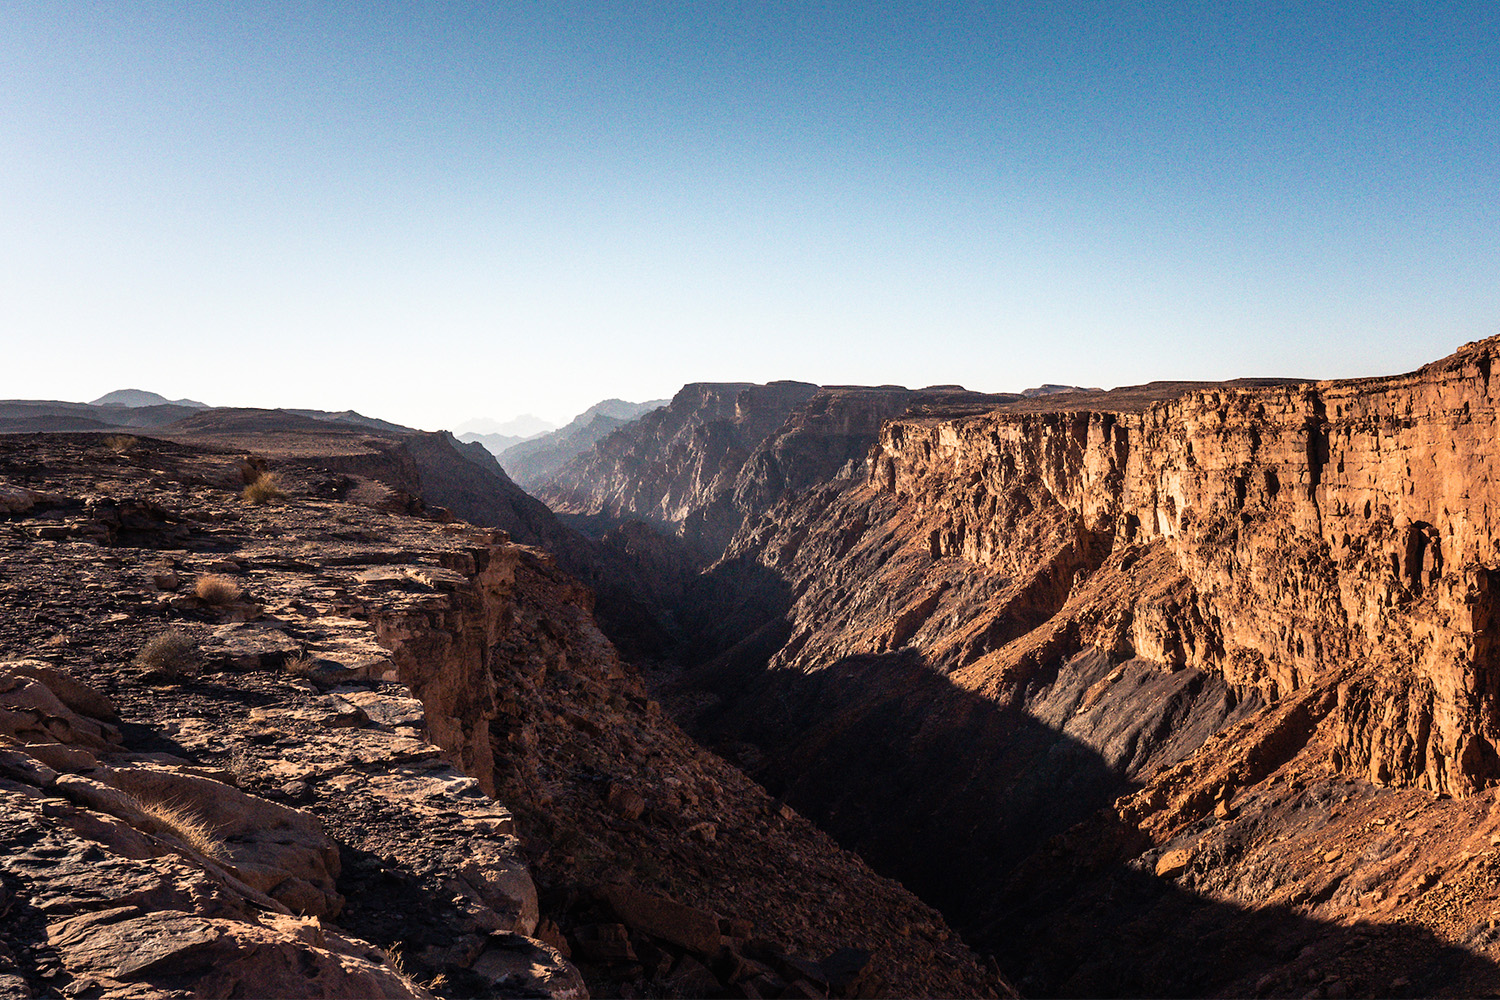 A view of canyons in a hidden corner of Arabia.